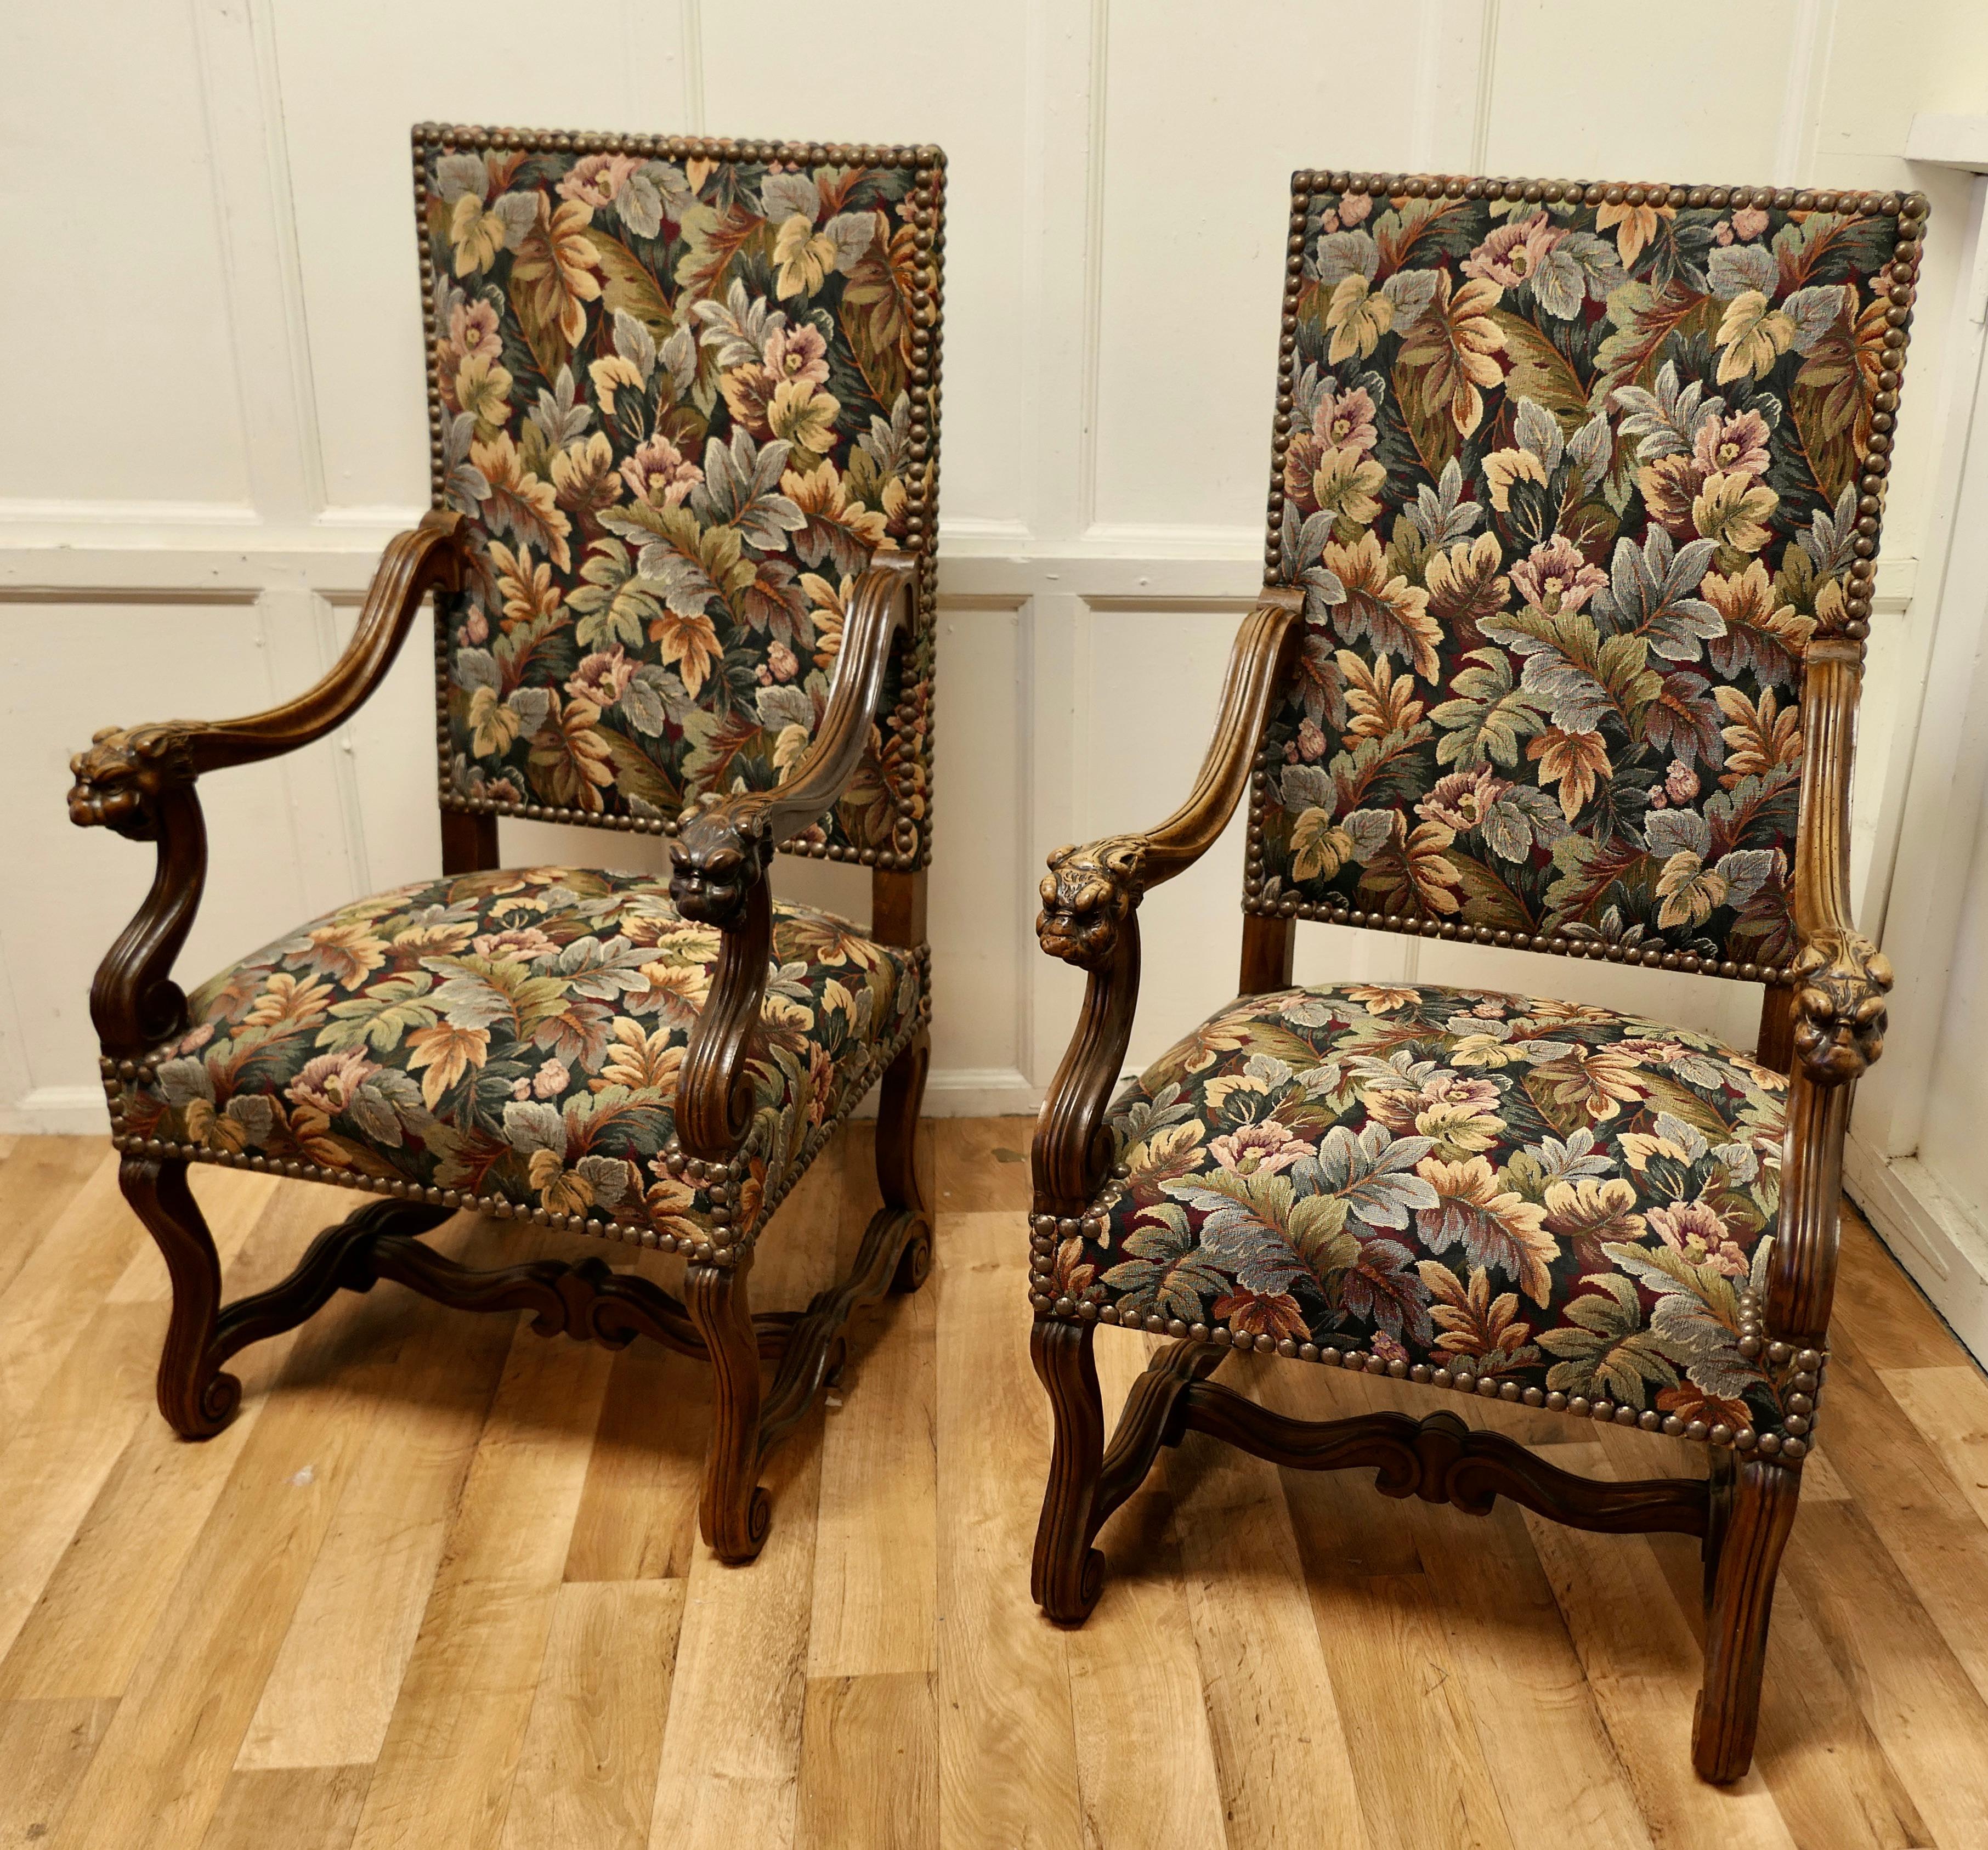 A Pair of French arts and crafts gothic walnut library chairs 

These beautiful chairs date from around 1880, recently upholsterd, the fabric has been especially designed and chosen for these chairs
So from the French Arts and Crafts movement we